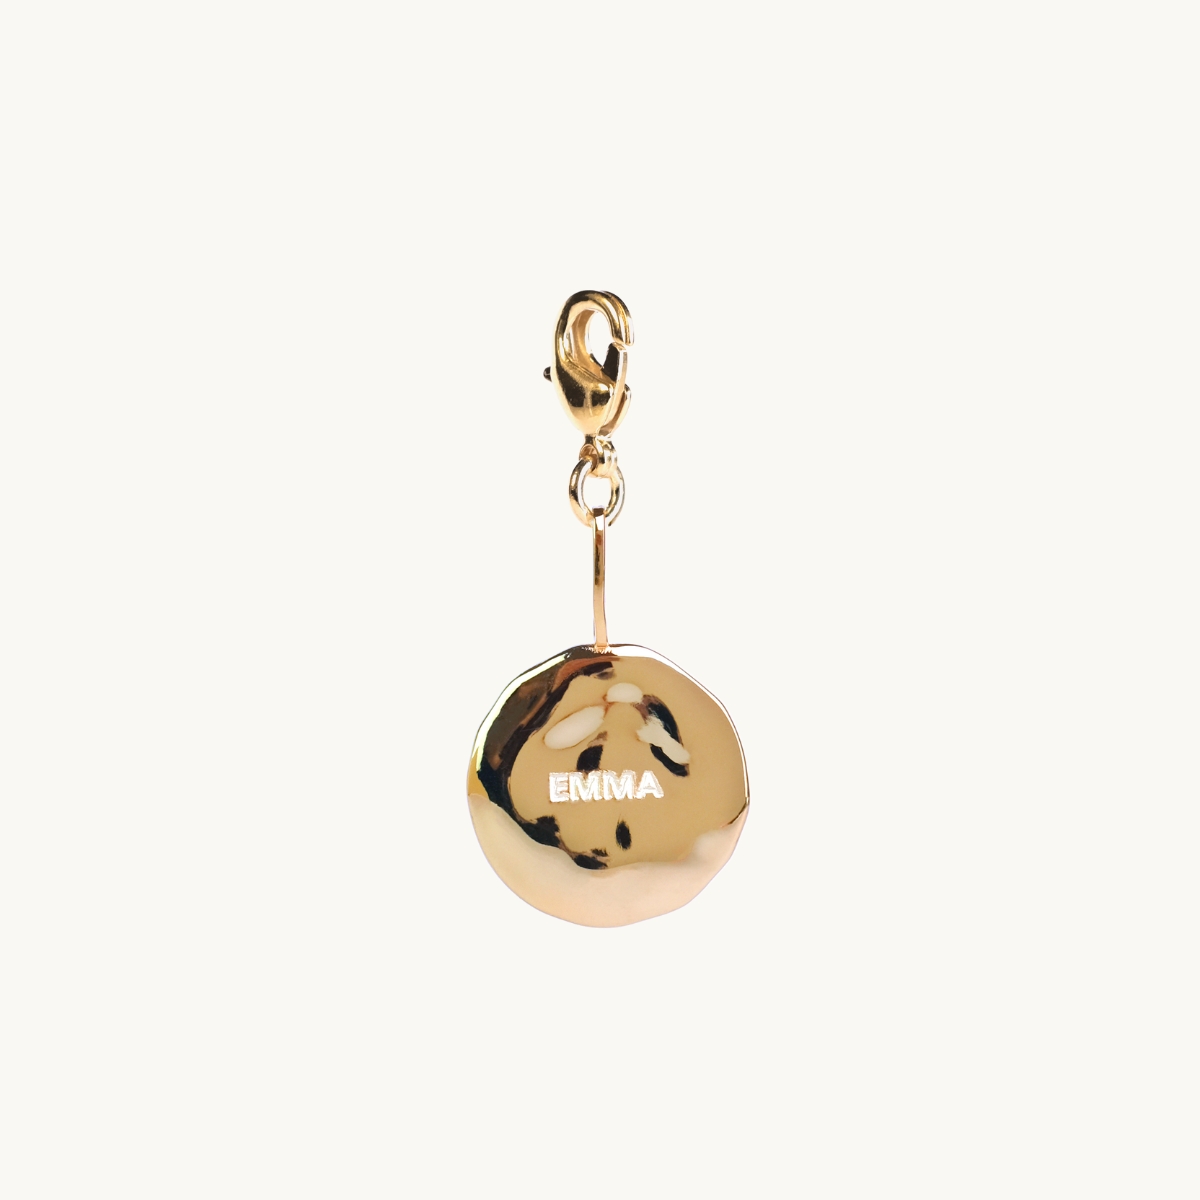 NAME COIN ORGANIC CHARM GOLD in the group SHOP / CHARMS at EMMA ISRAELSSON (charm022)